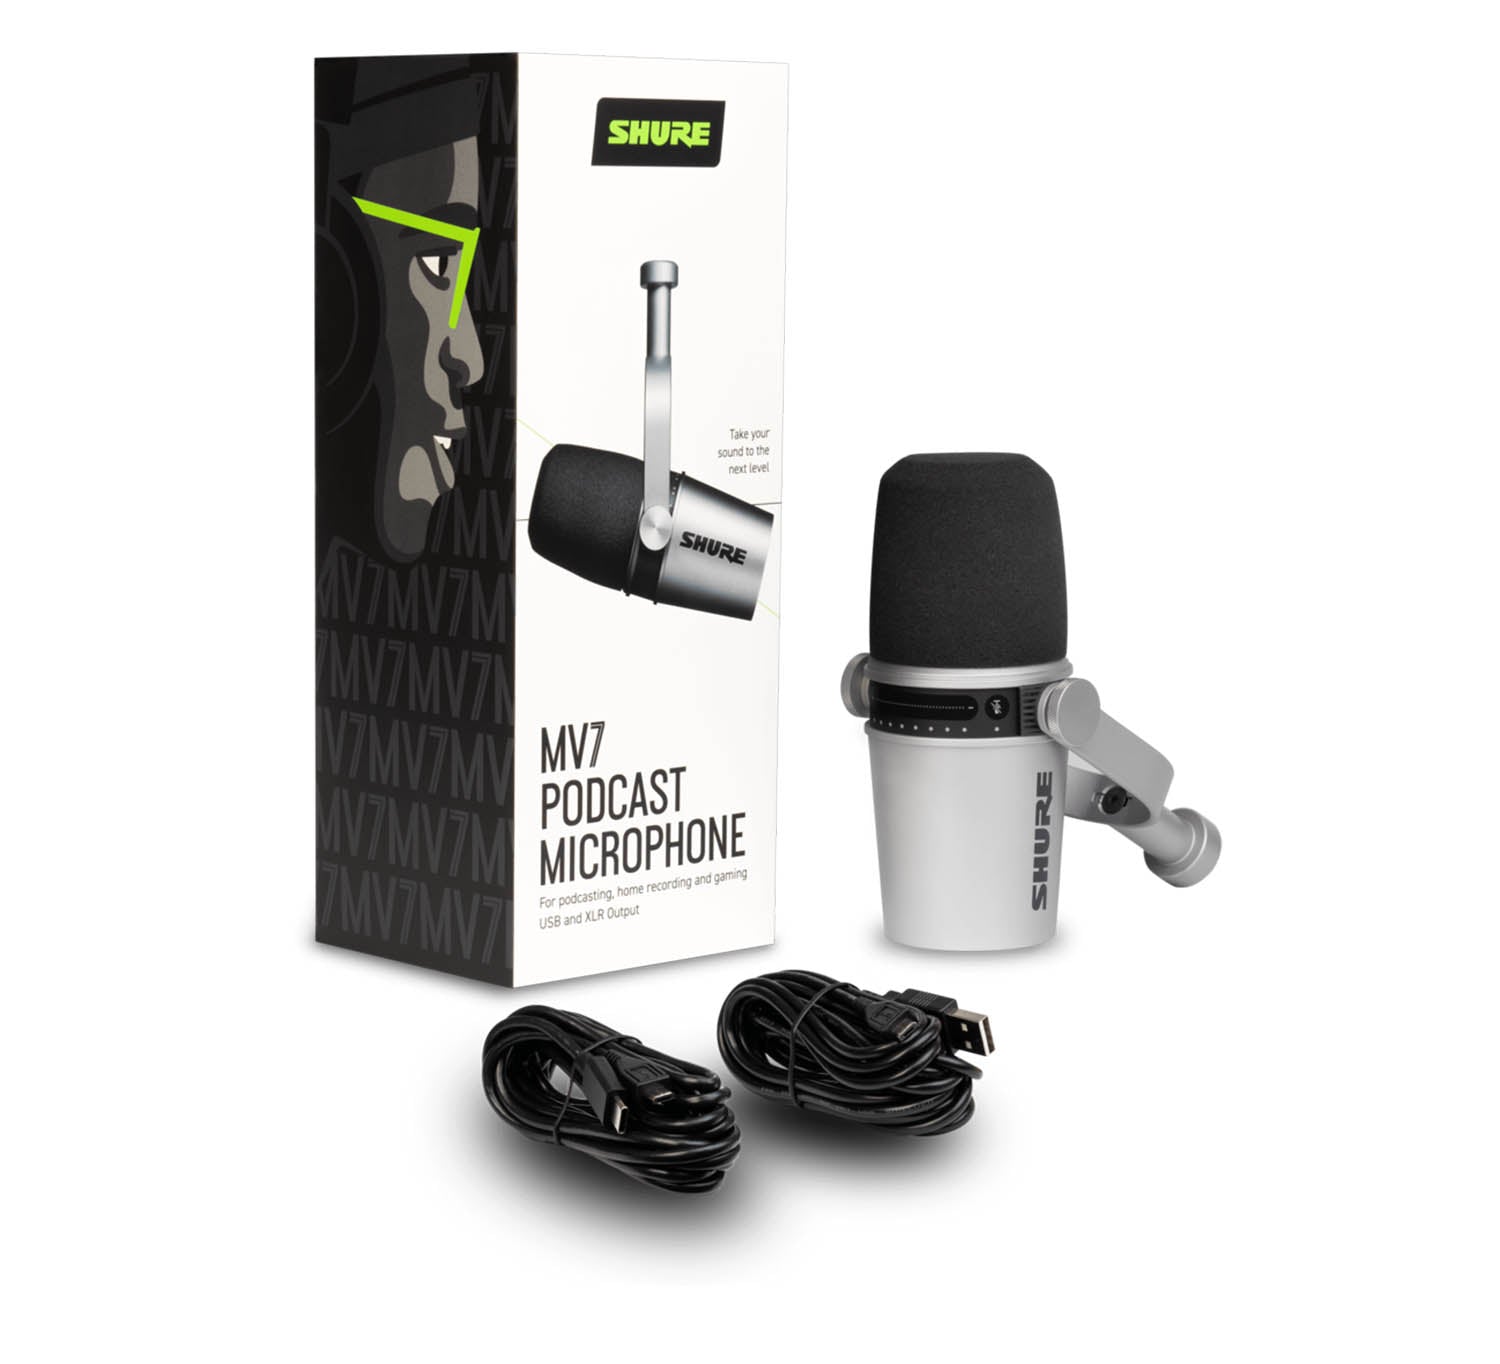 Shure Podcast Package with SRH440A Studio Headphones and MV7-S USB Podcast Microphone - Hollywood DJ